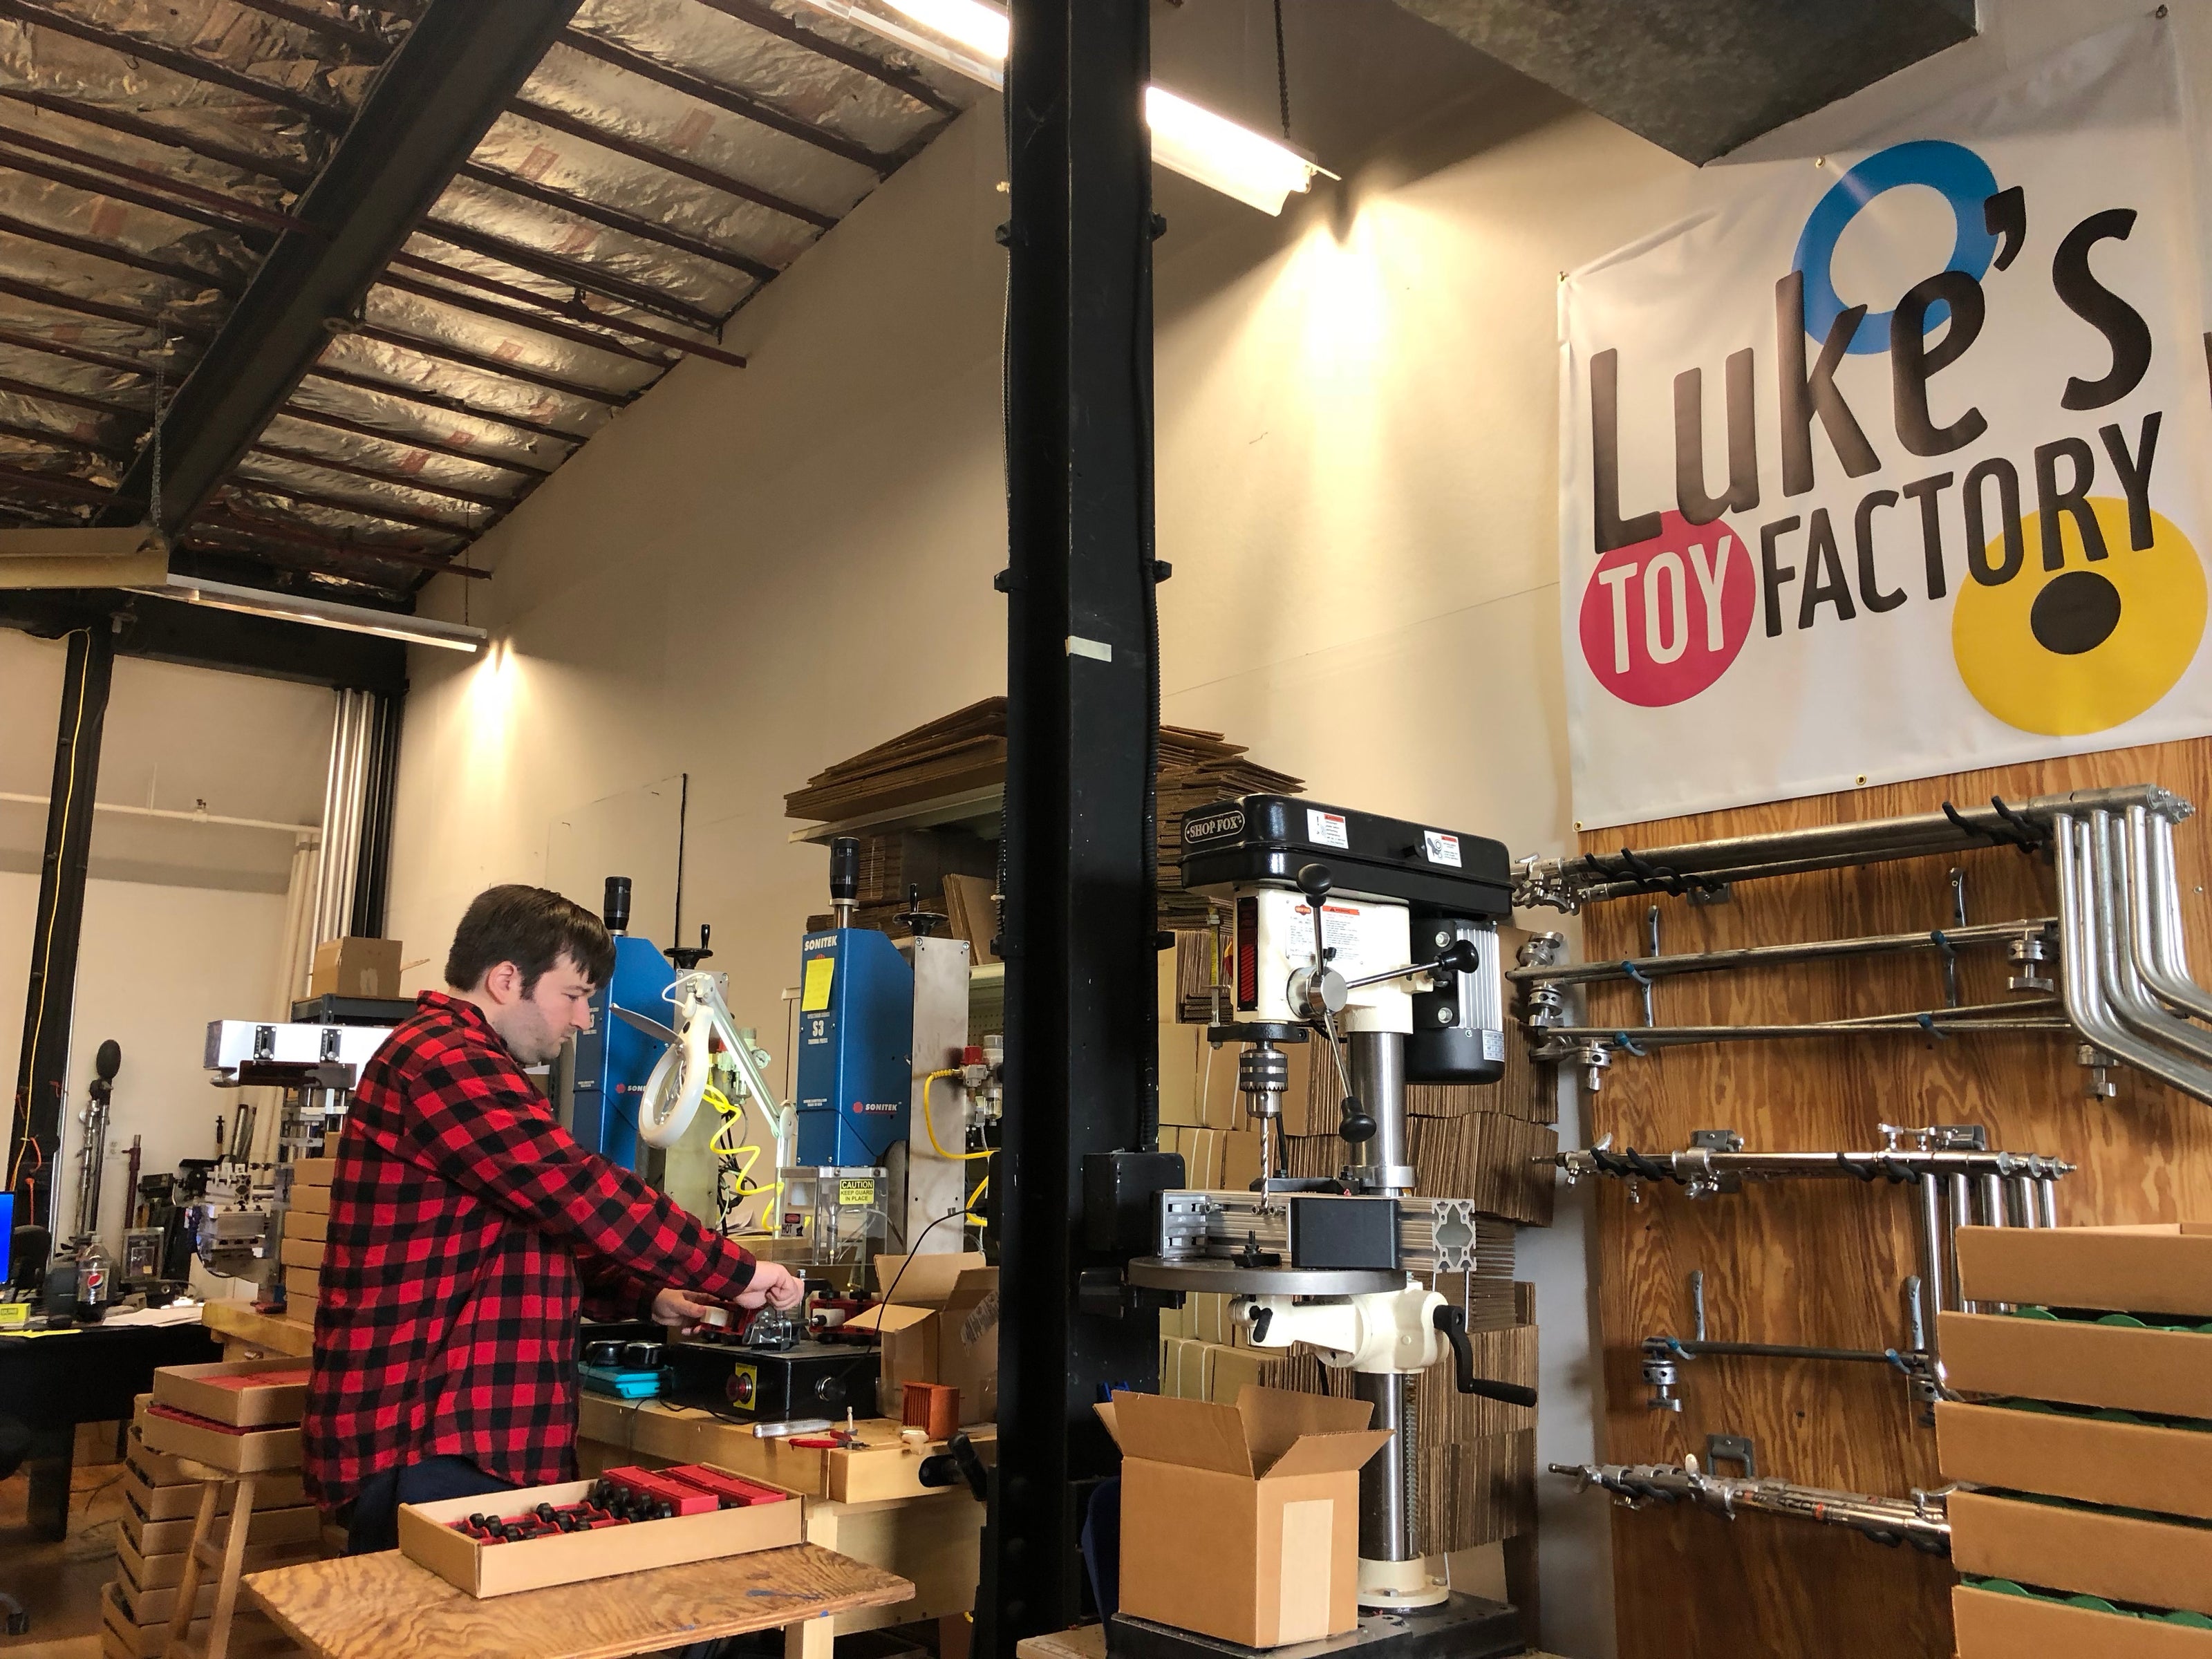 Luke working in the Luke's Toy Factory shop at the heat staking machine, assembling toy trucks